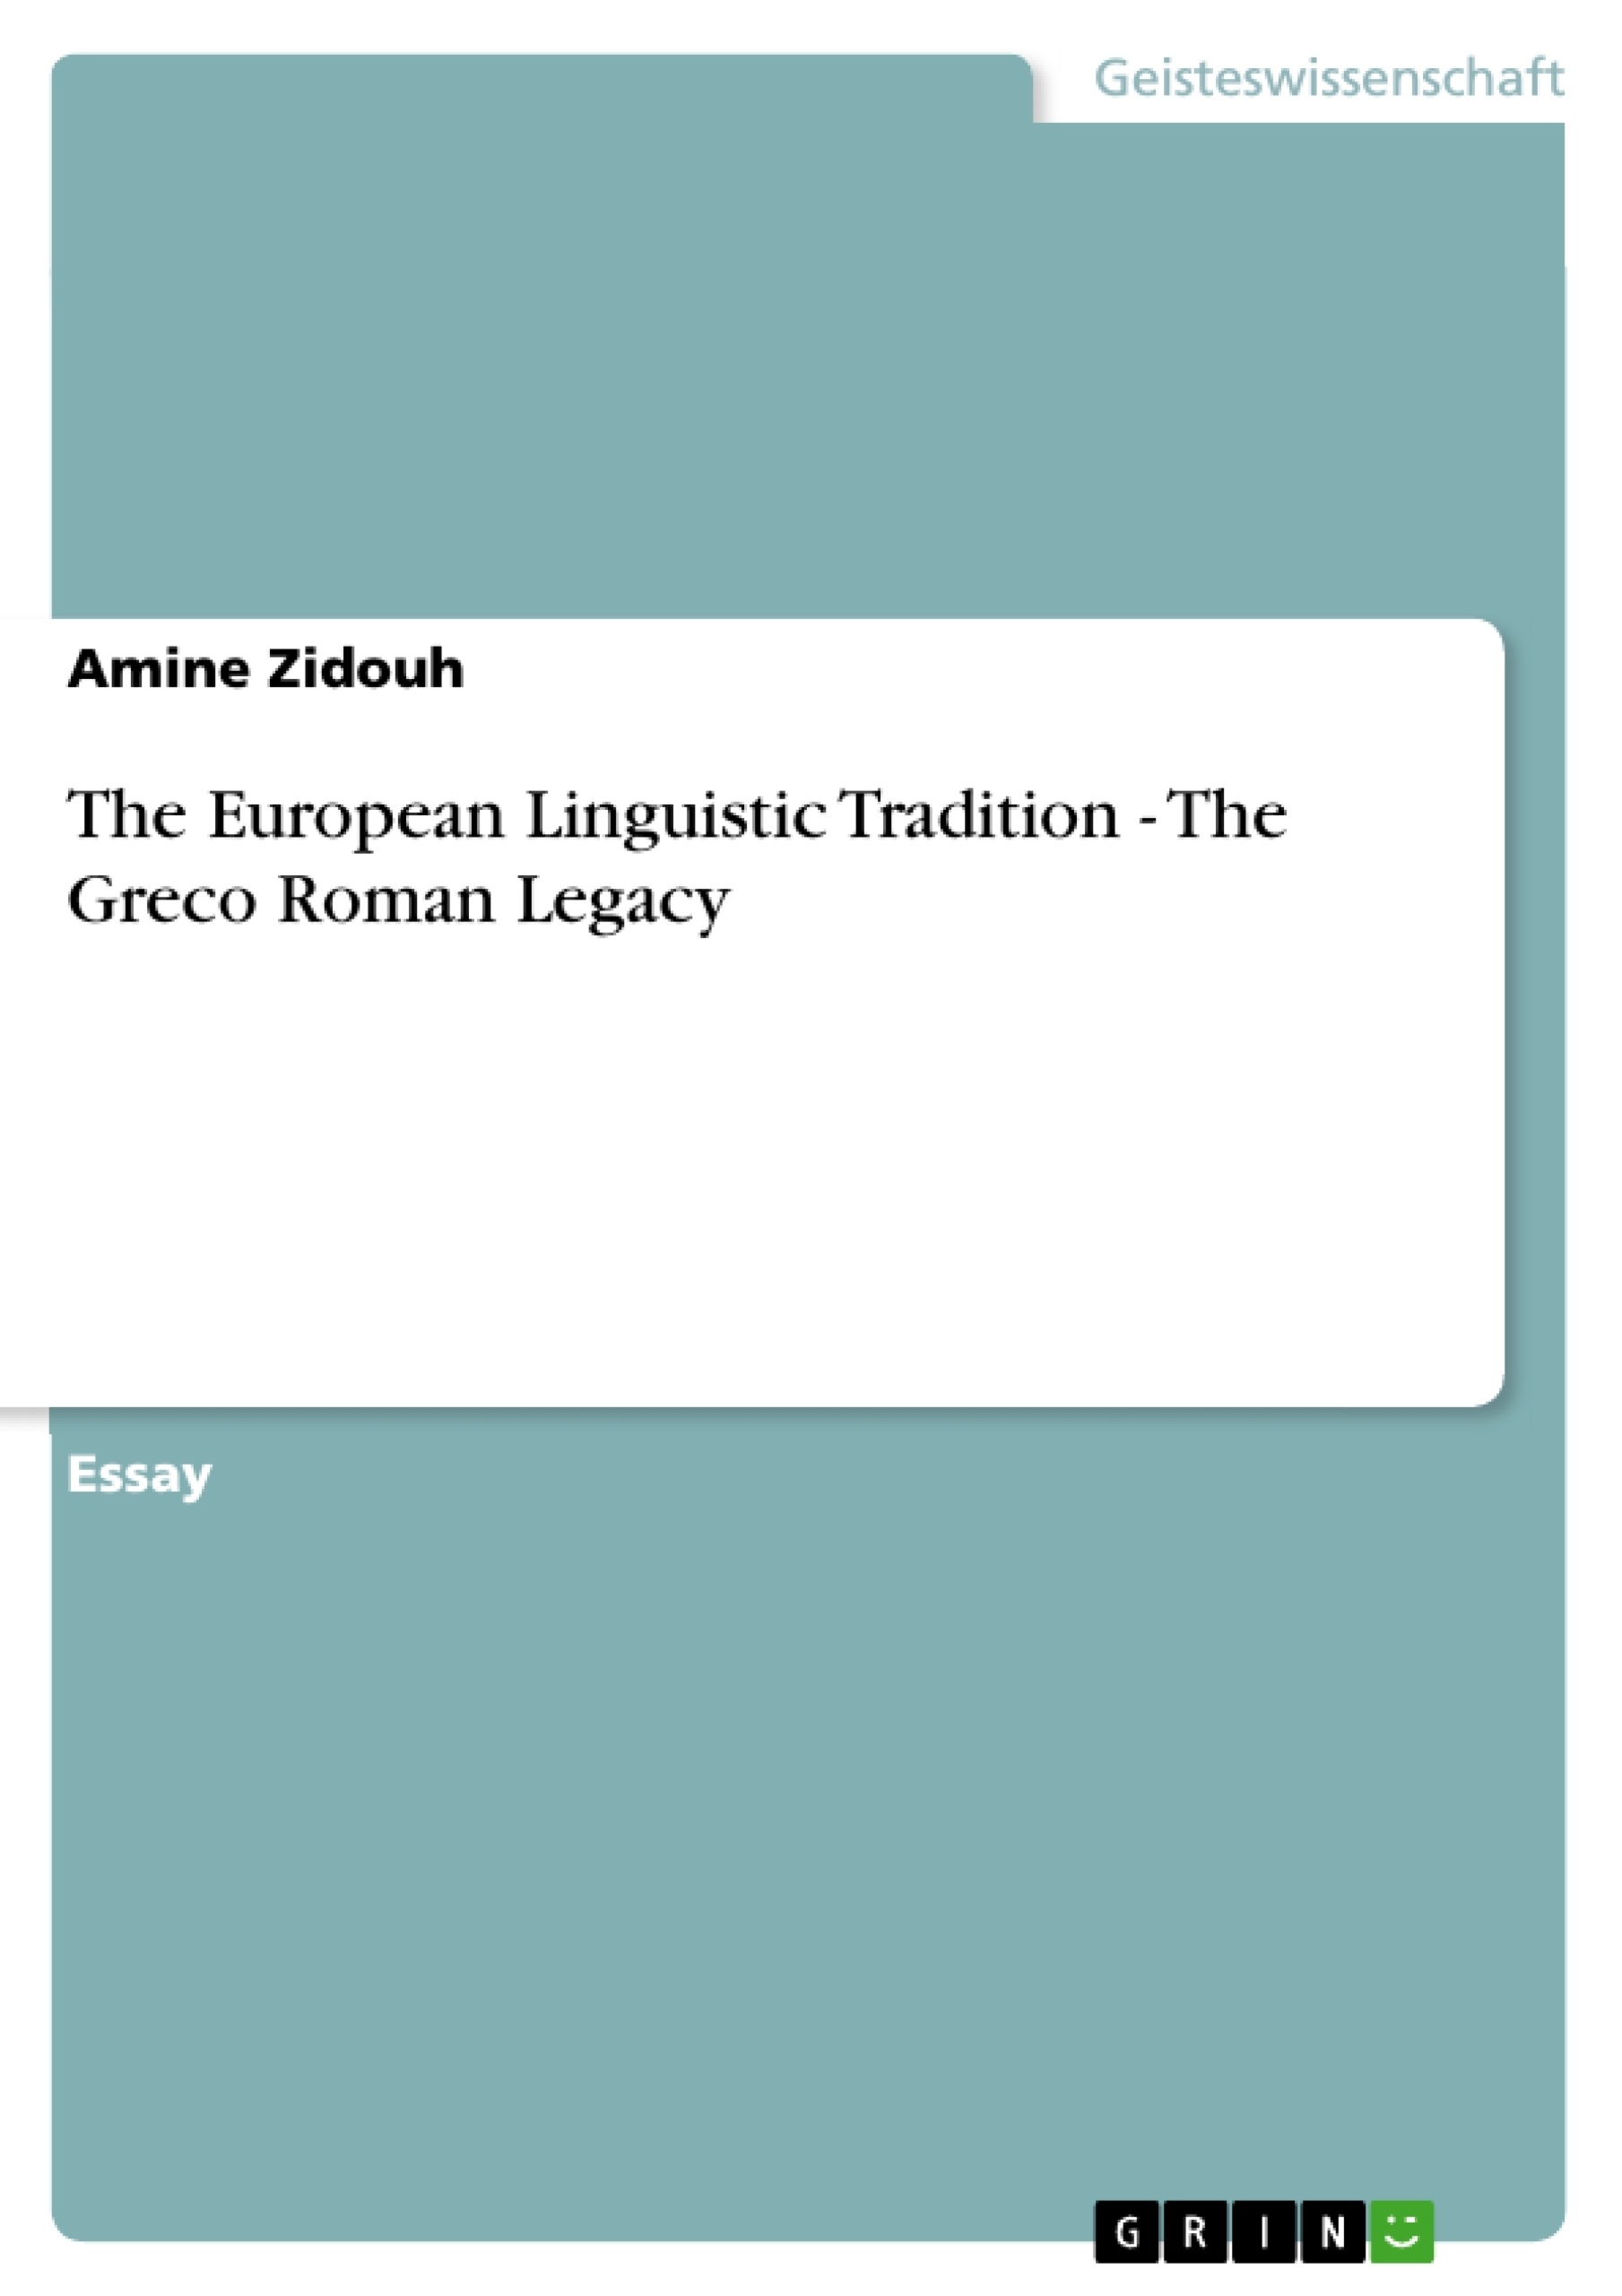 Título: The European Linguistic Tradition - The Greco Roman Legacy